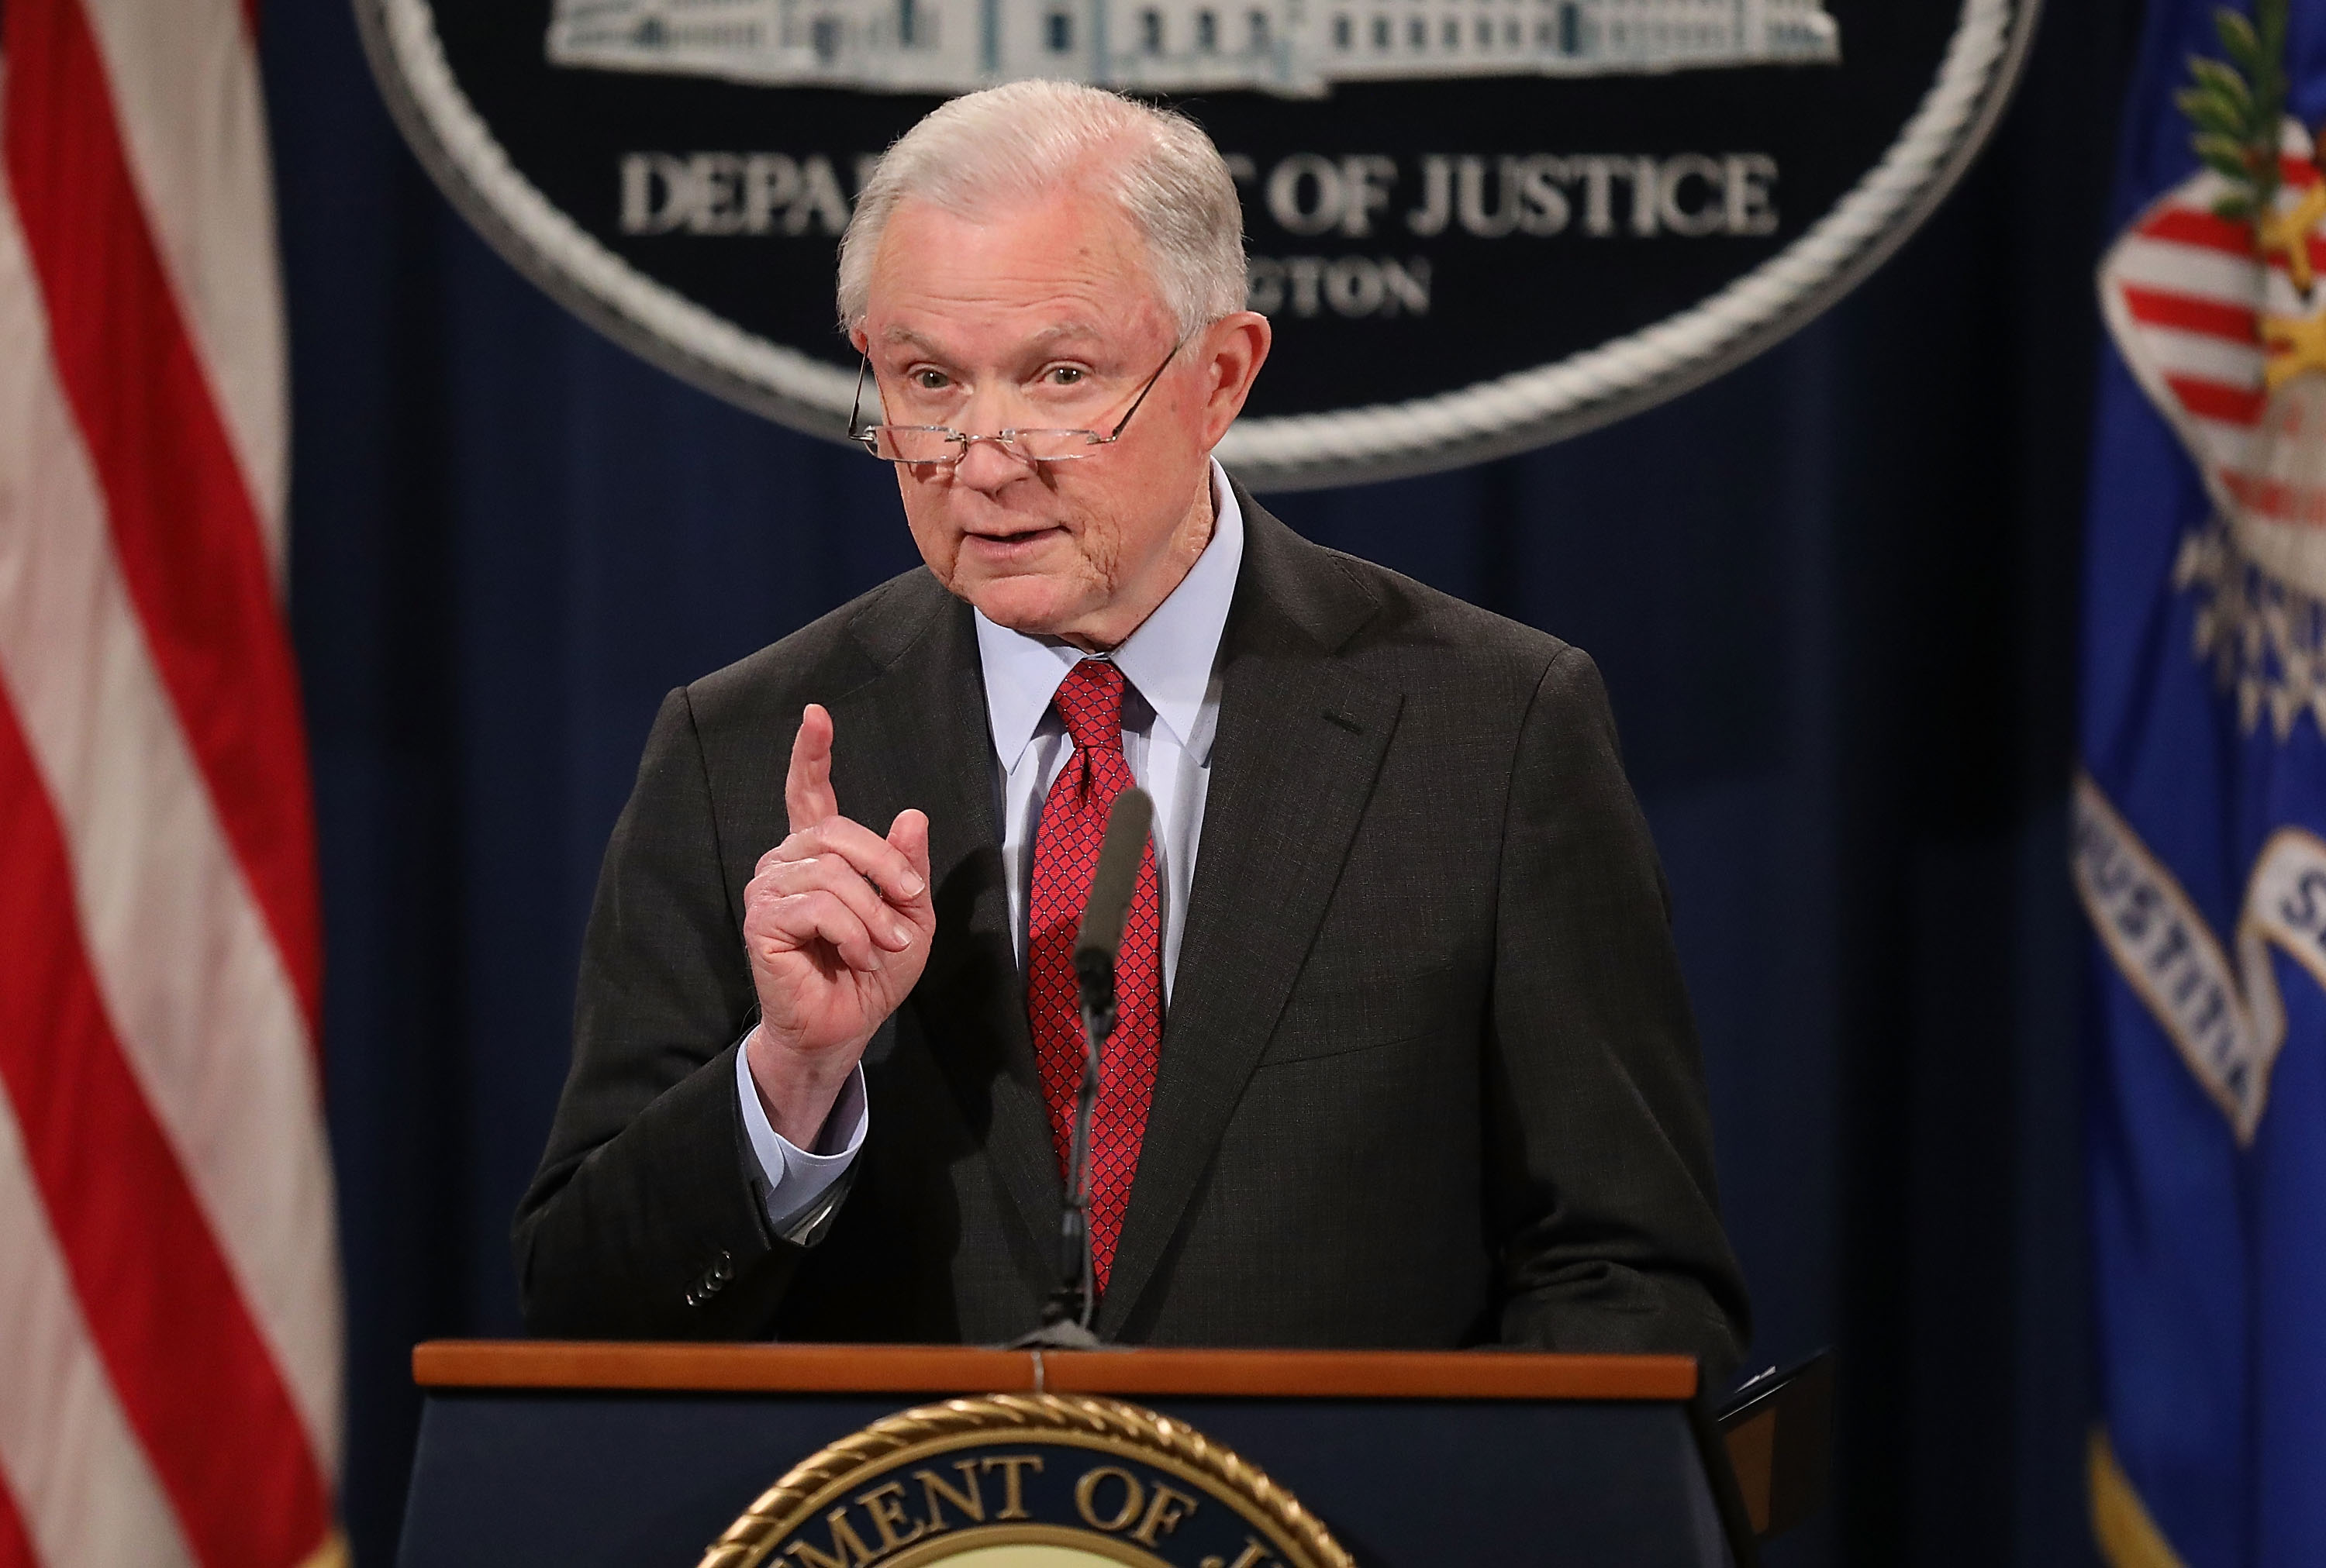 U.S. Attorney General Jeff Sessions at the Department of Justice on Dec. 15, 2017 in Washington, DC (Chip Somodevilla—Getty Images)